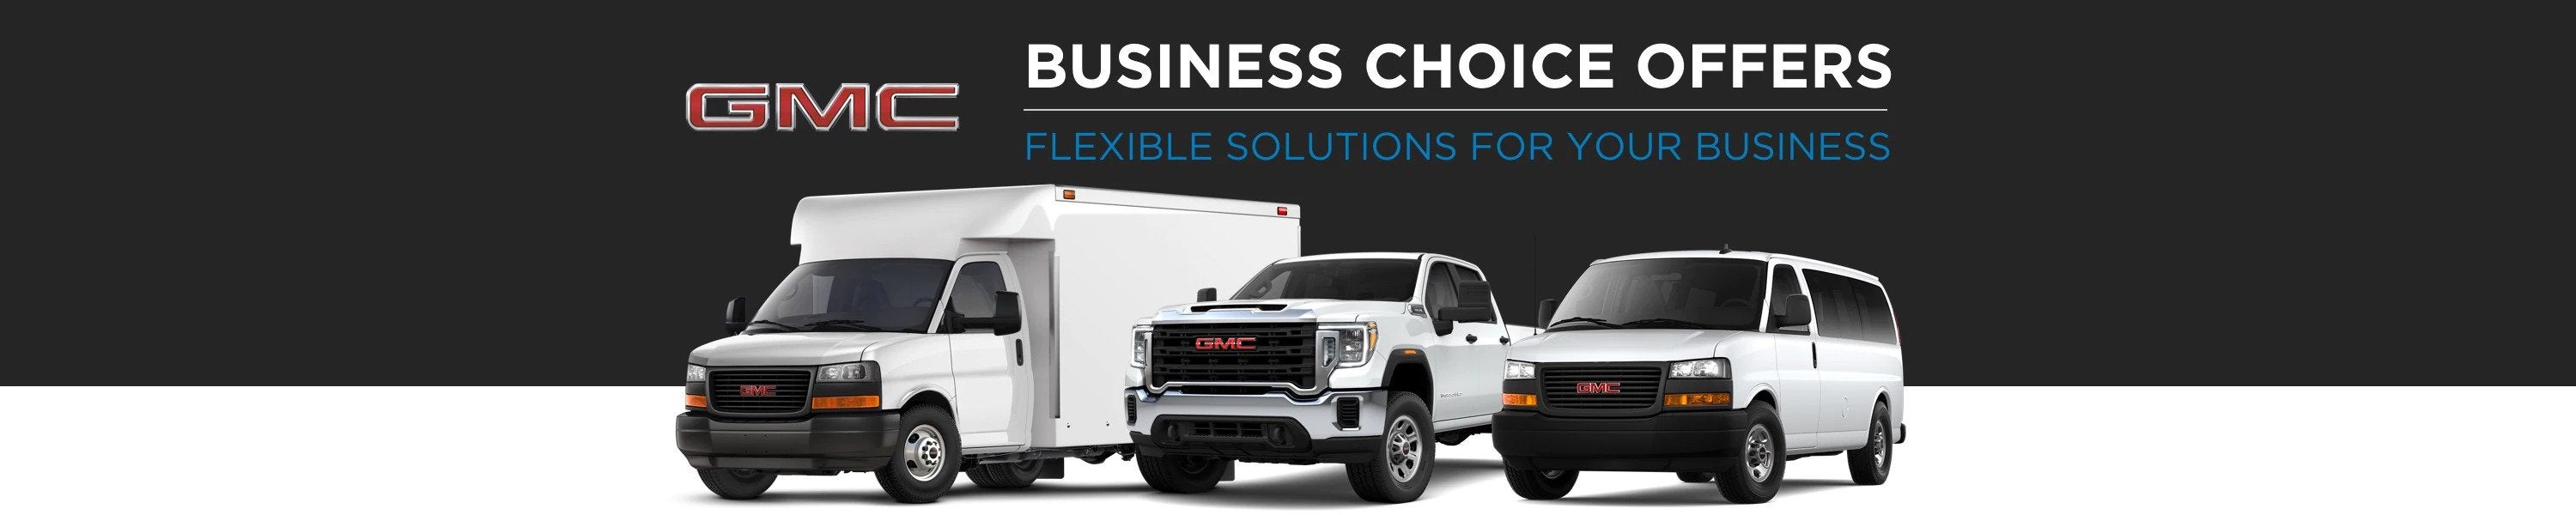 GMC Business Choice Offers - Flexible Solutions for your Business - Conley Buick GMC in BRADENTON FL